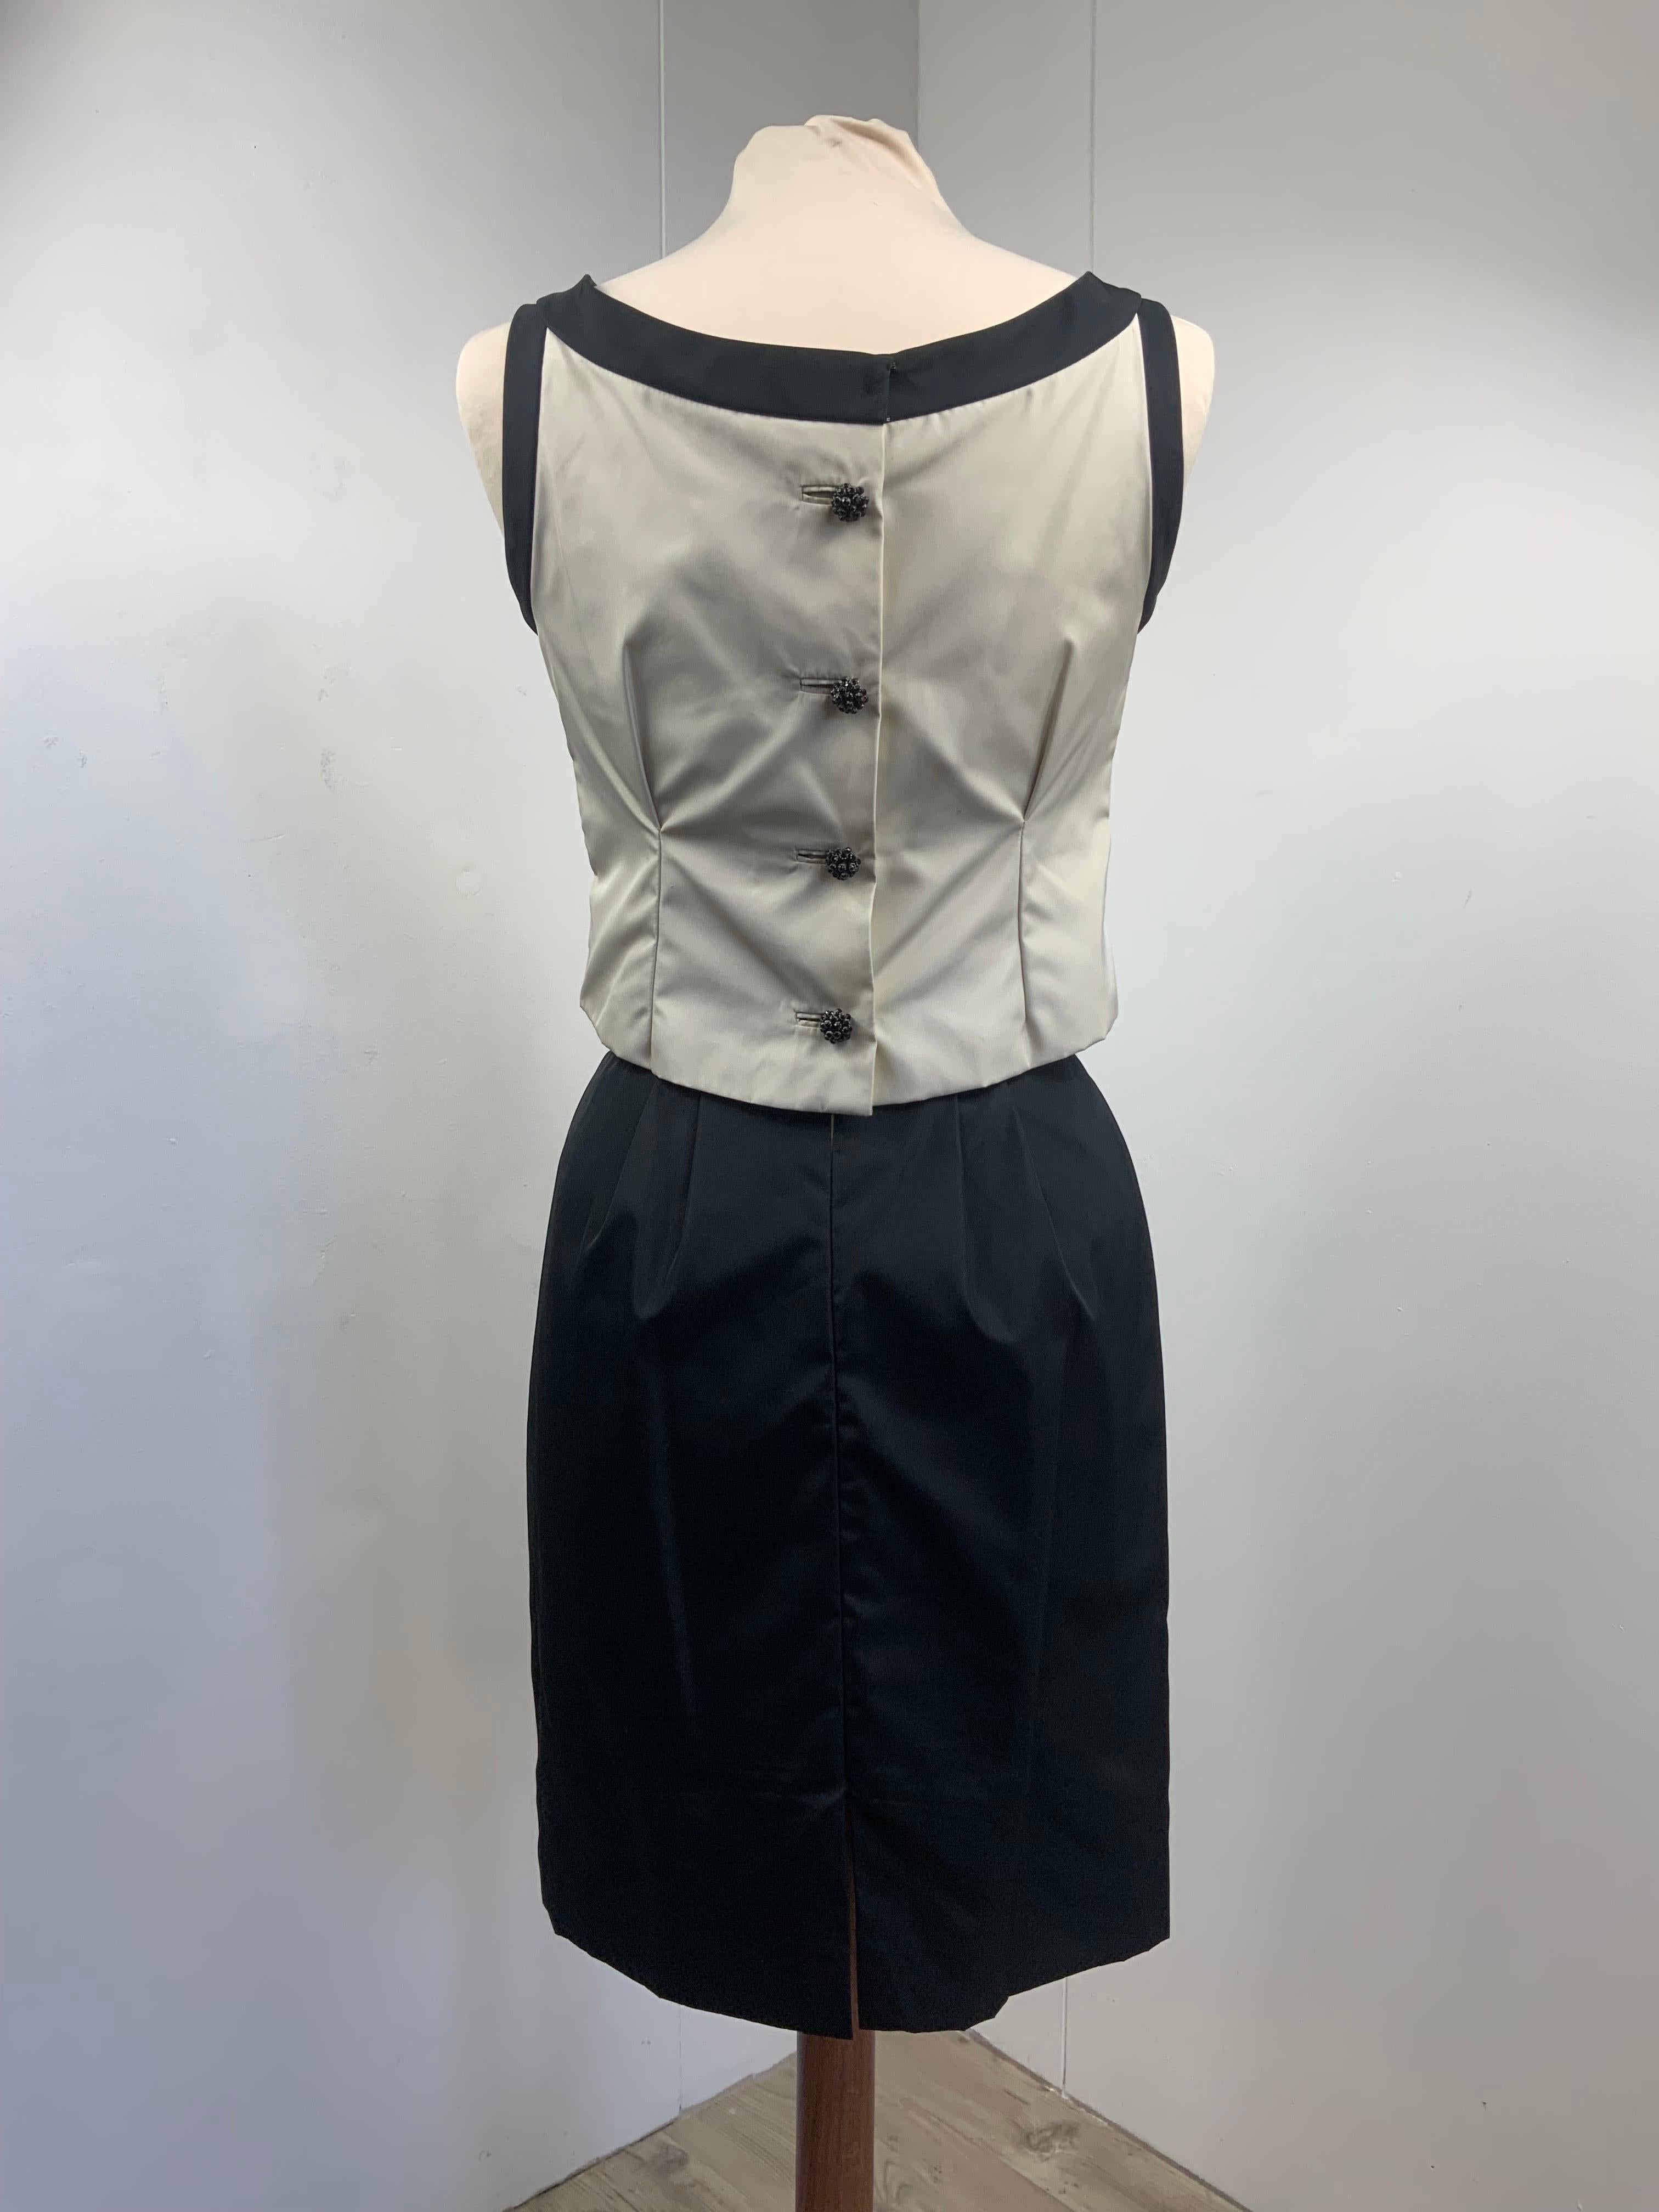 Balenciaga bicolor Dress  In Excellent Condition For Sale In Carnate, IT